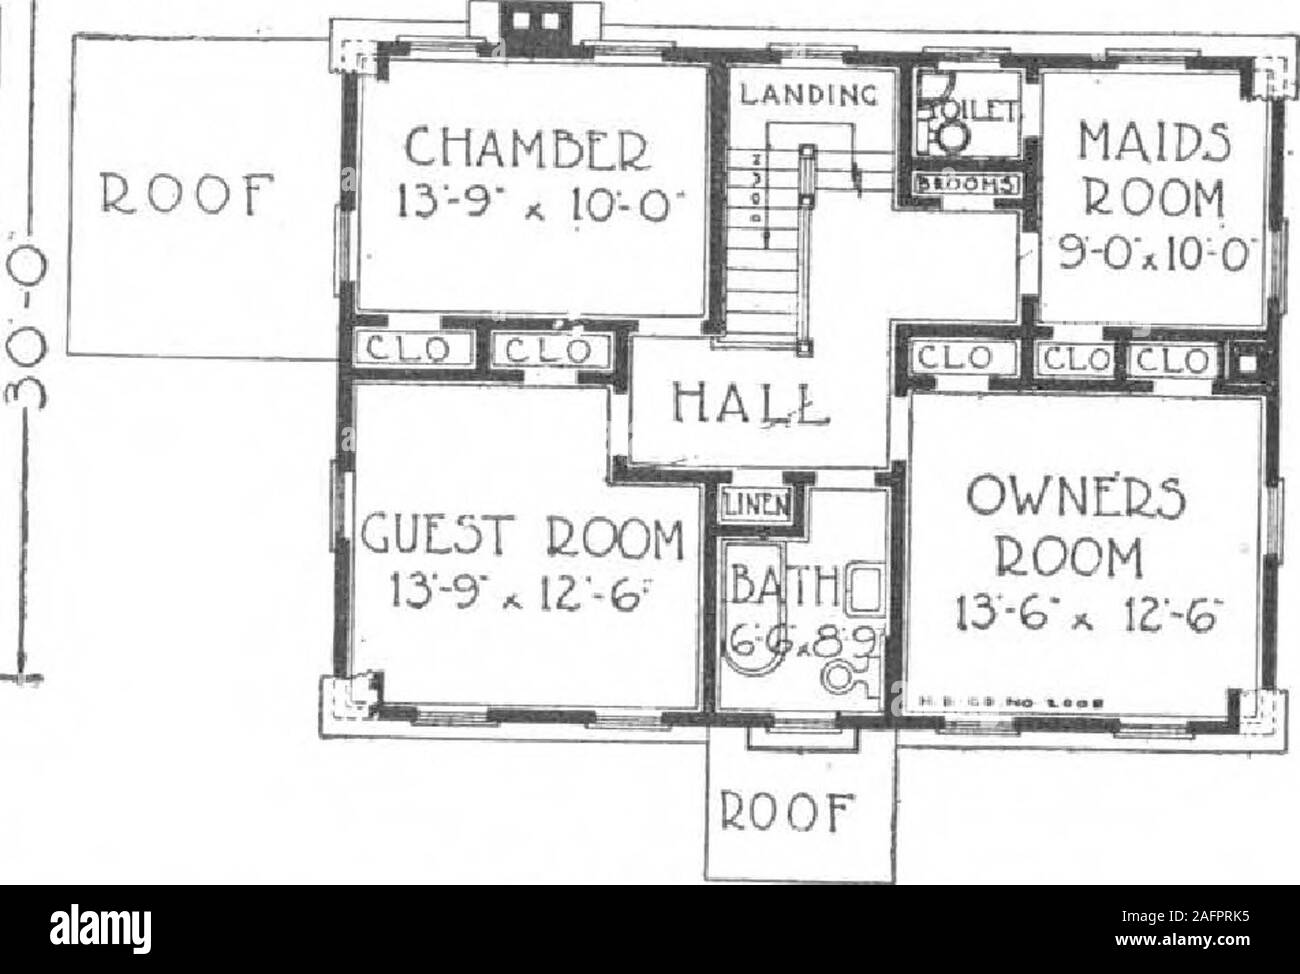 . A plan book of Harris homes. Read our interesting Free Plan Offer in the introductory pages, the wonderful advantagesot the Harris Way and do not overlook the mill-work and interior furnishings shown on last pages.Write us immediately. F1H5T FLOOD PLAN. SECOND FLOOD. PLAN HARRIS BROTHERS COMPANY, 35th and Iron Streets, CHICAGO, ILLINOIS Page 76 Stock Photo